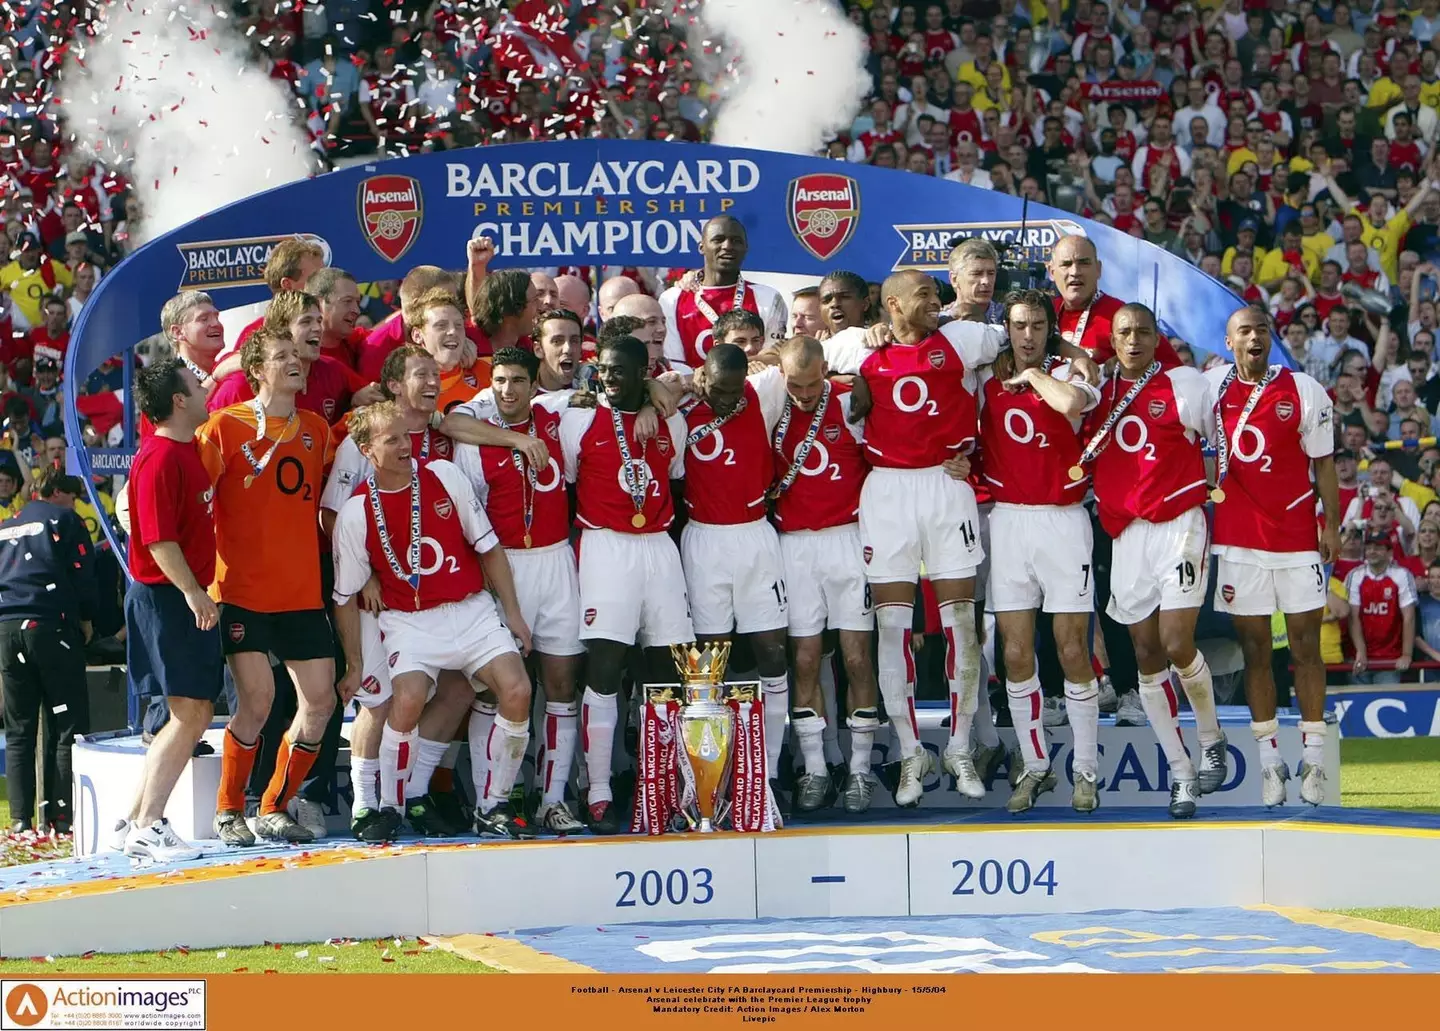 Arsenal's undefeated champions could not create a legacy and defend the title, or win it since. Image: PA Images